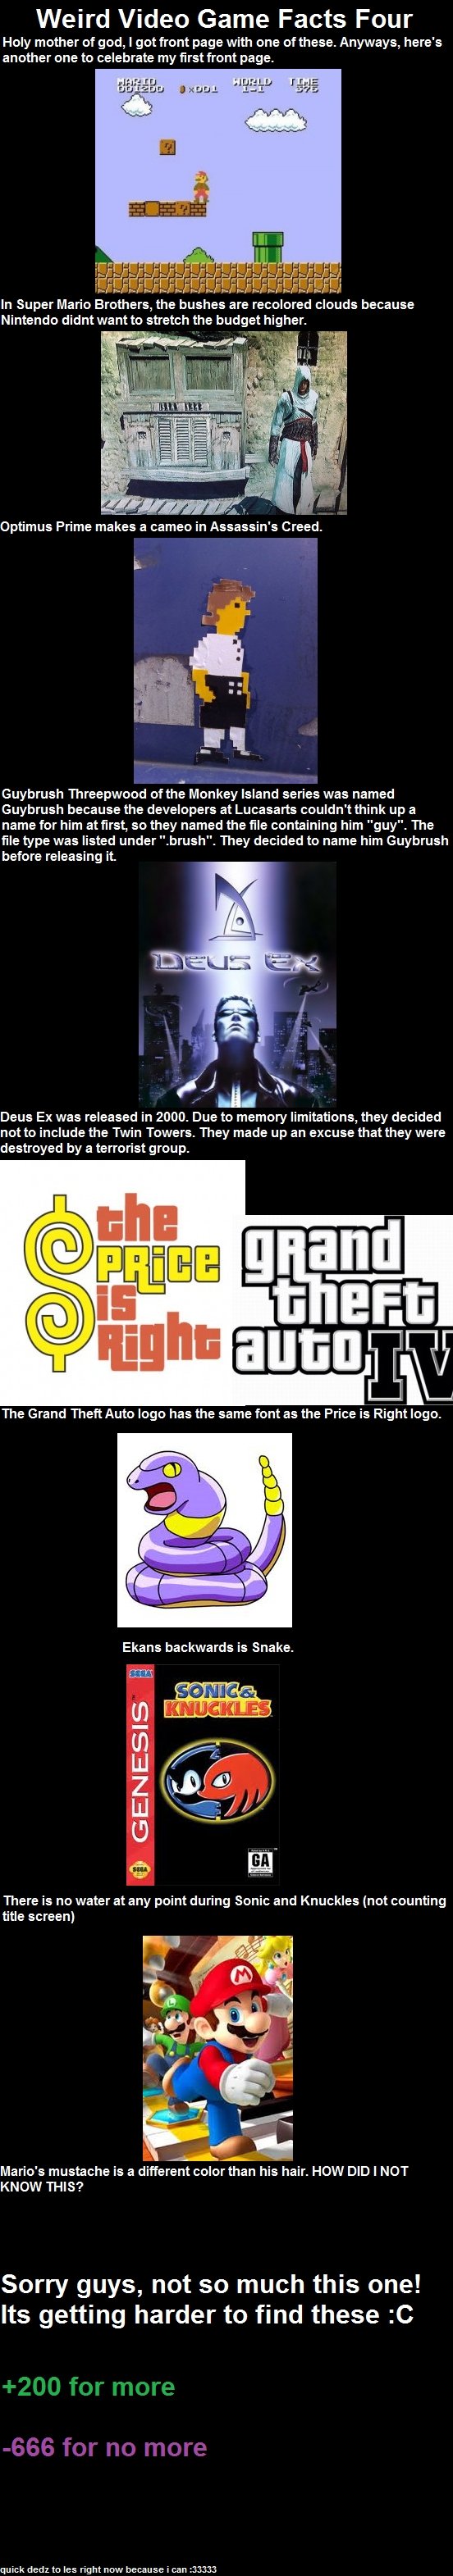 Weird Video Game Facts 4. I GOT A FRONT PAGGEEEEEEEEE TWO OF THEM C:&lt;br /&gt; part 1: &lt;a href=&quot;pictures/1459774/Weird+Video+Game+Facts+part+1/&quot; 